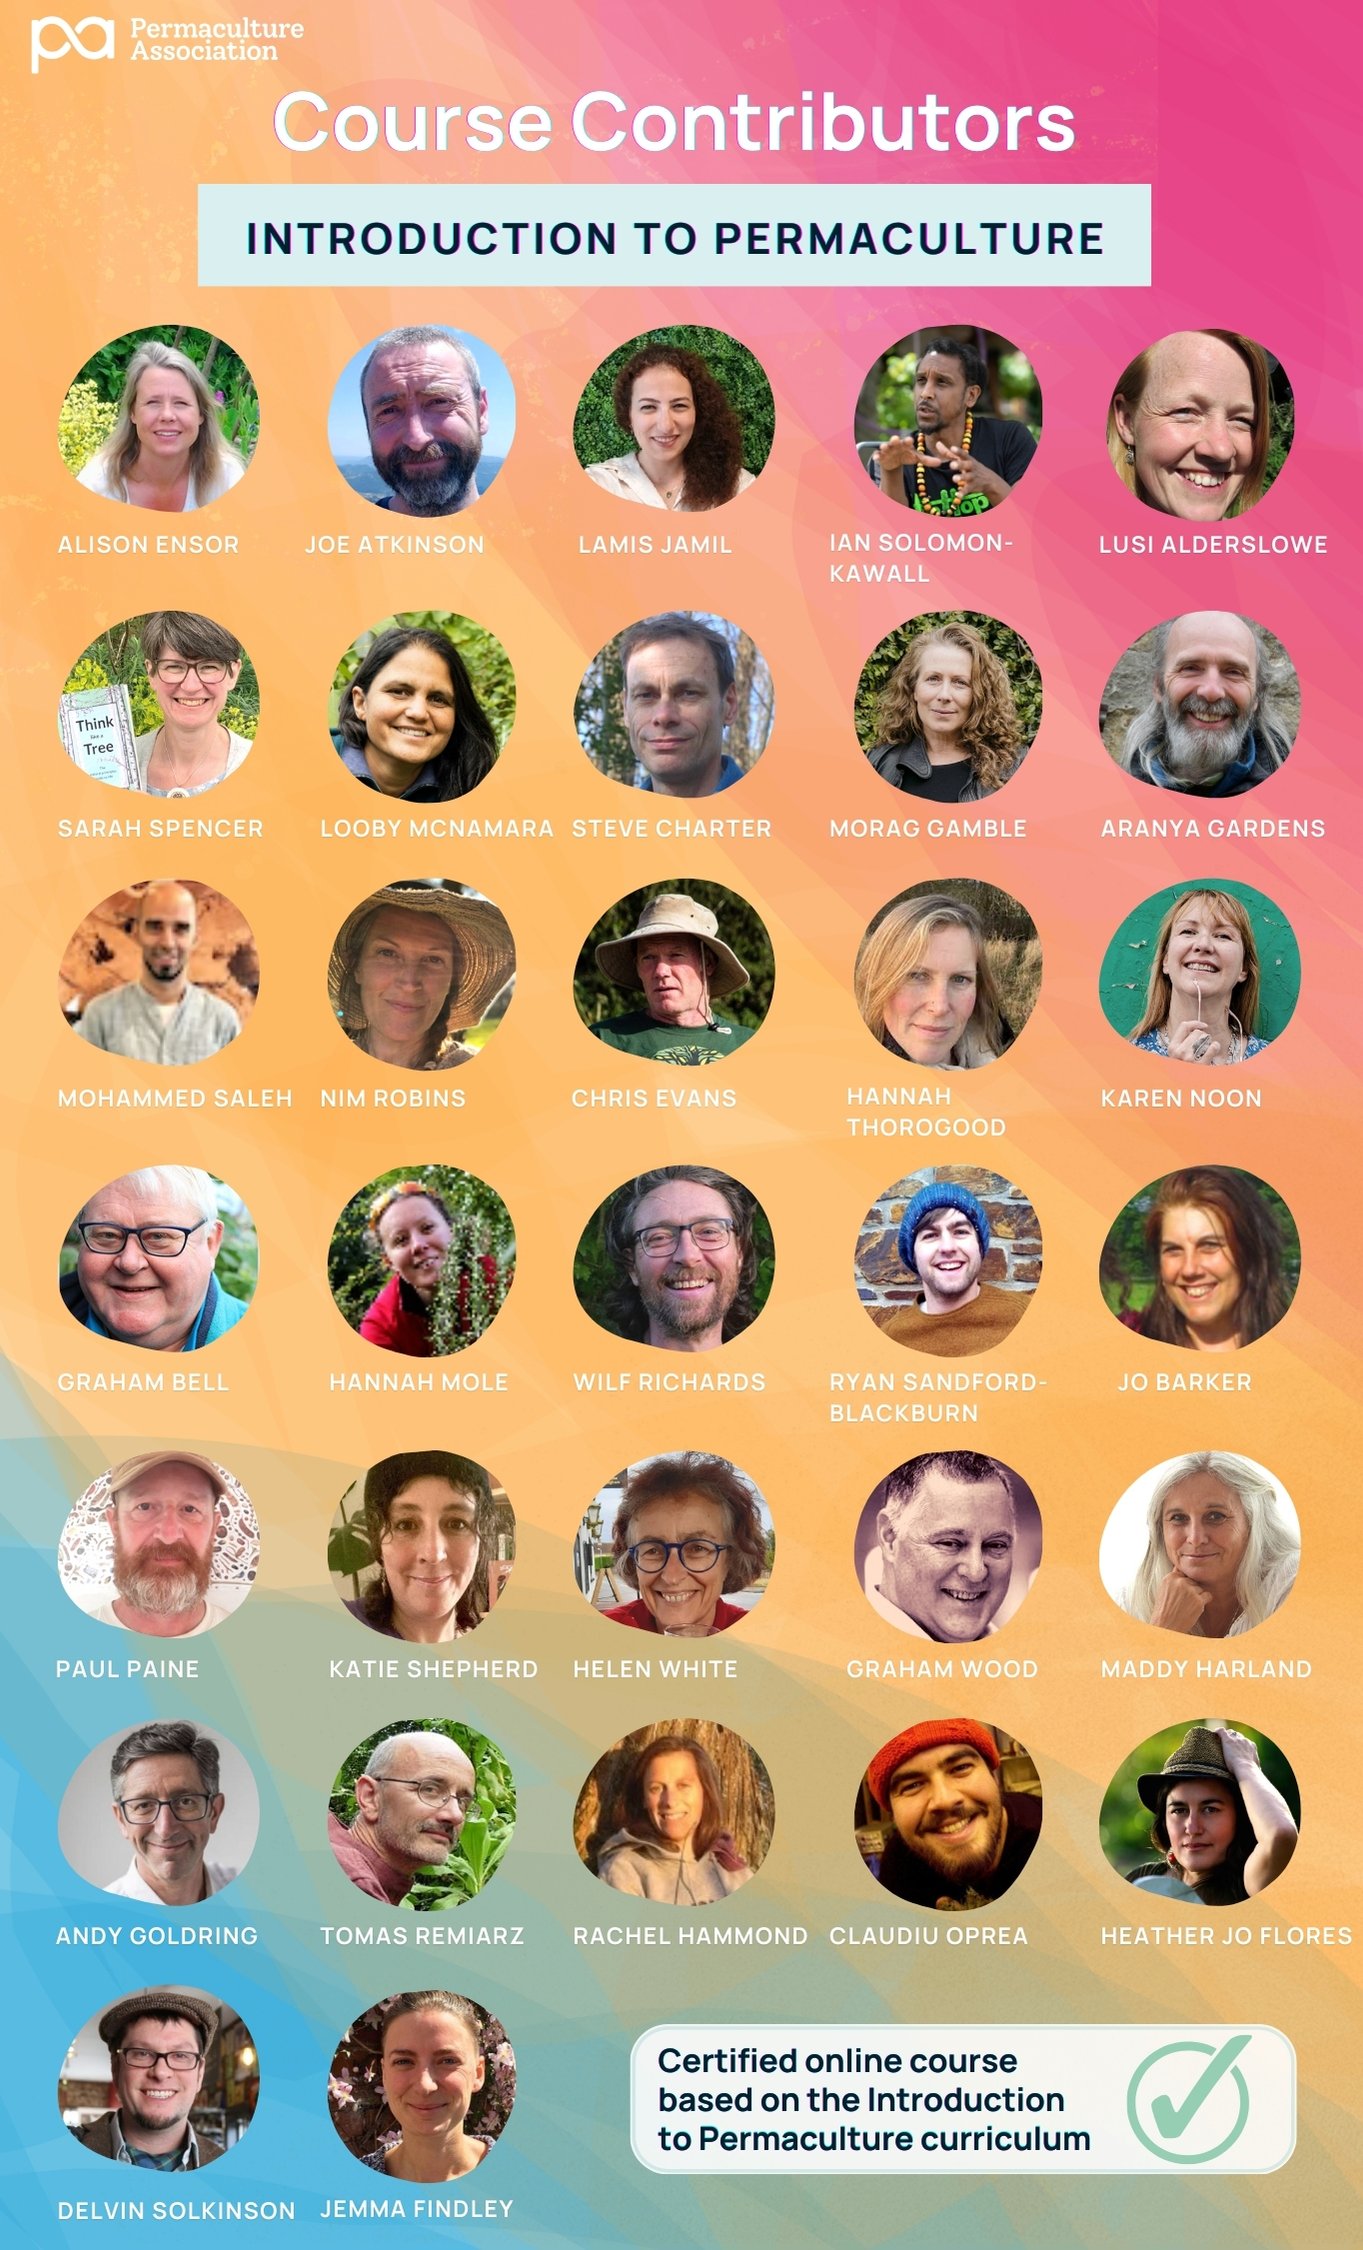 Introduction to Permaculture course contributors